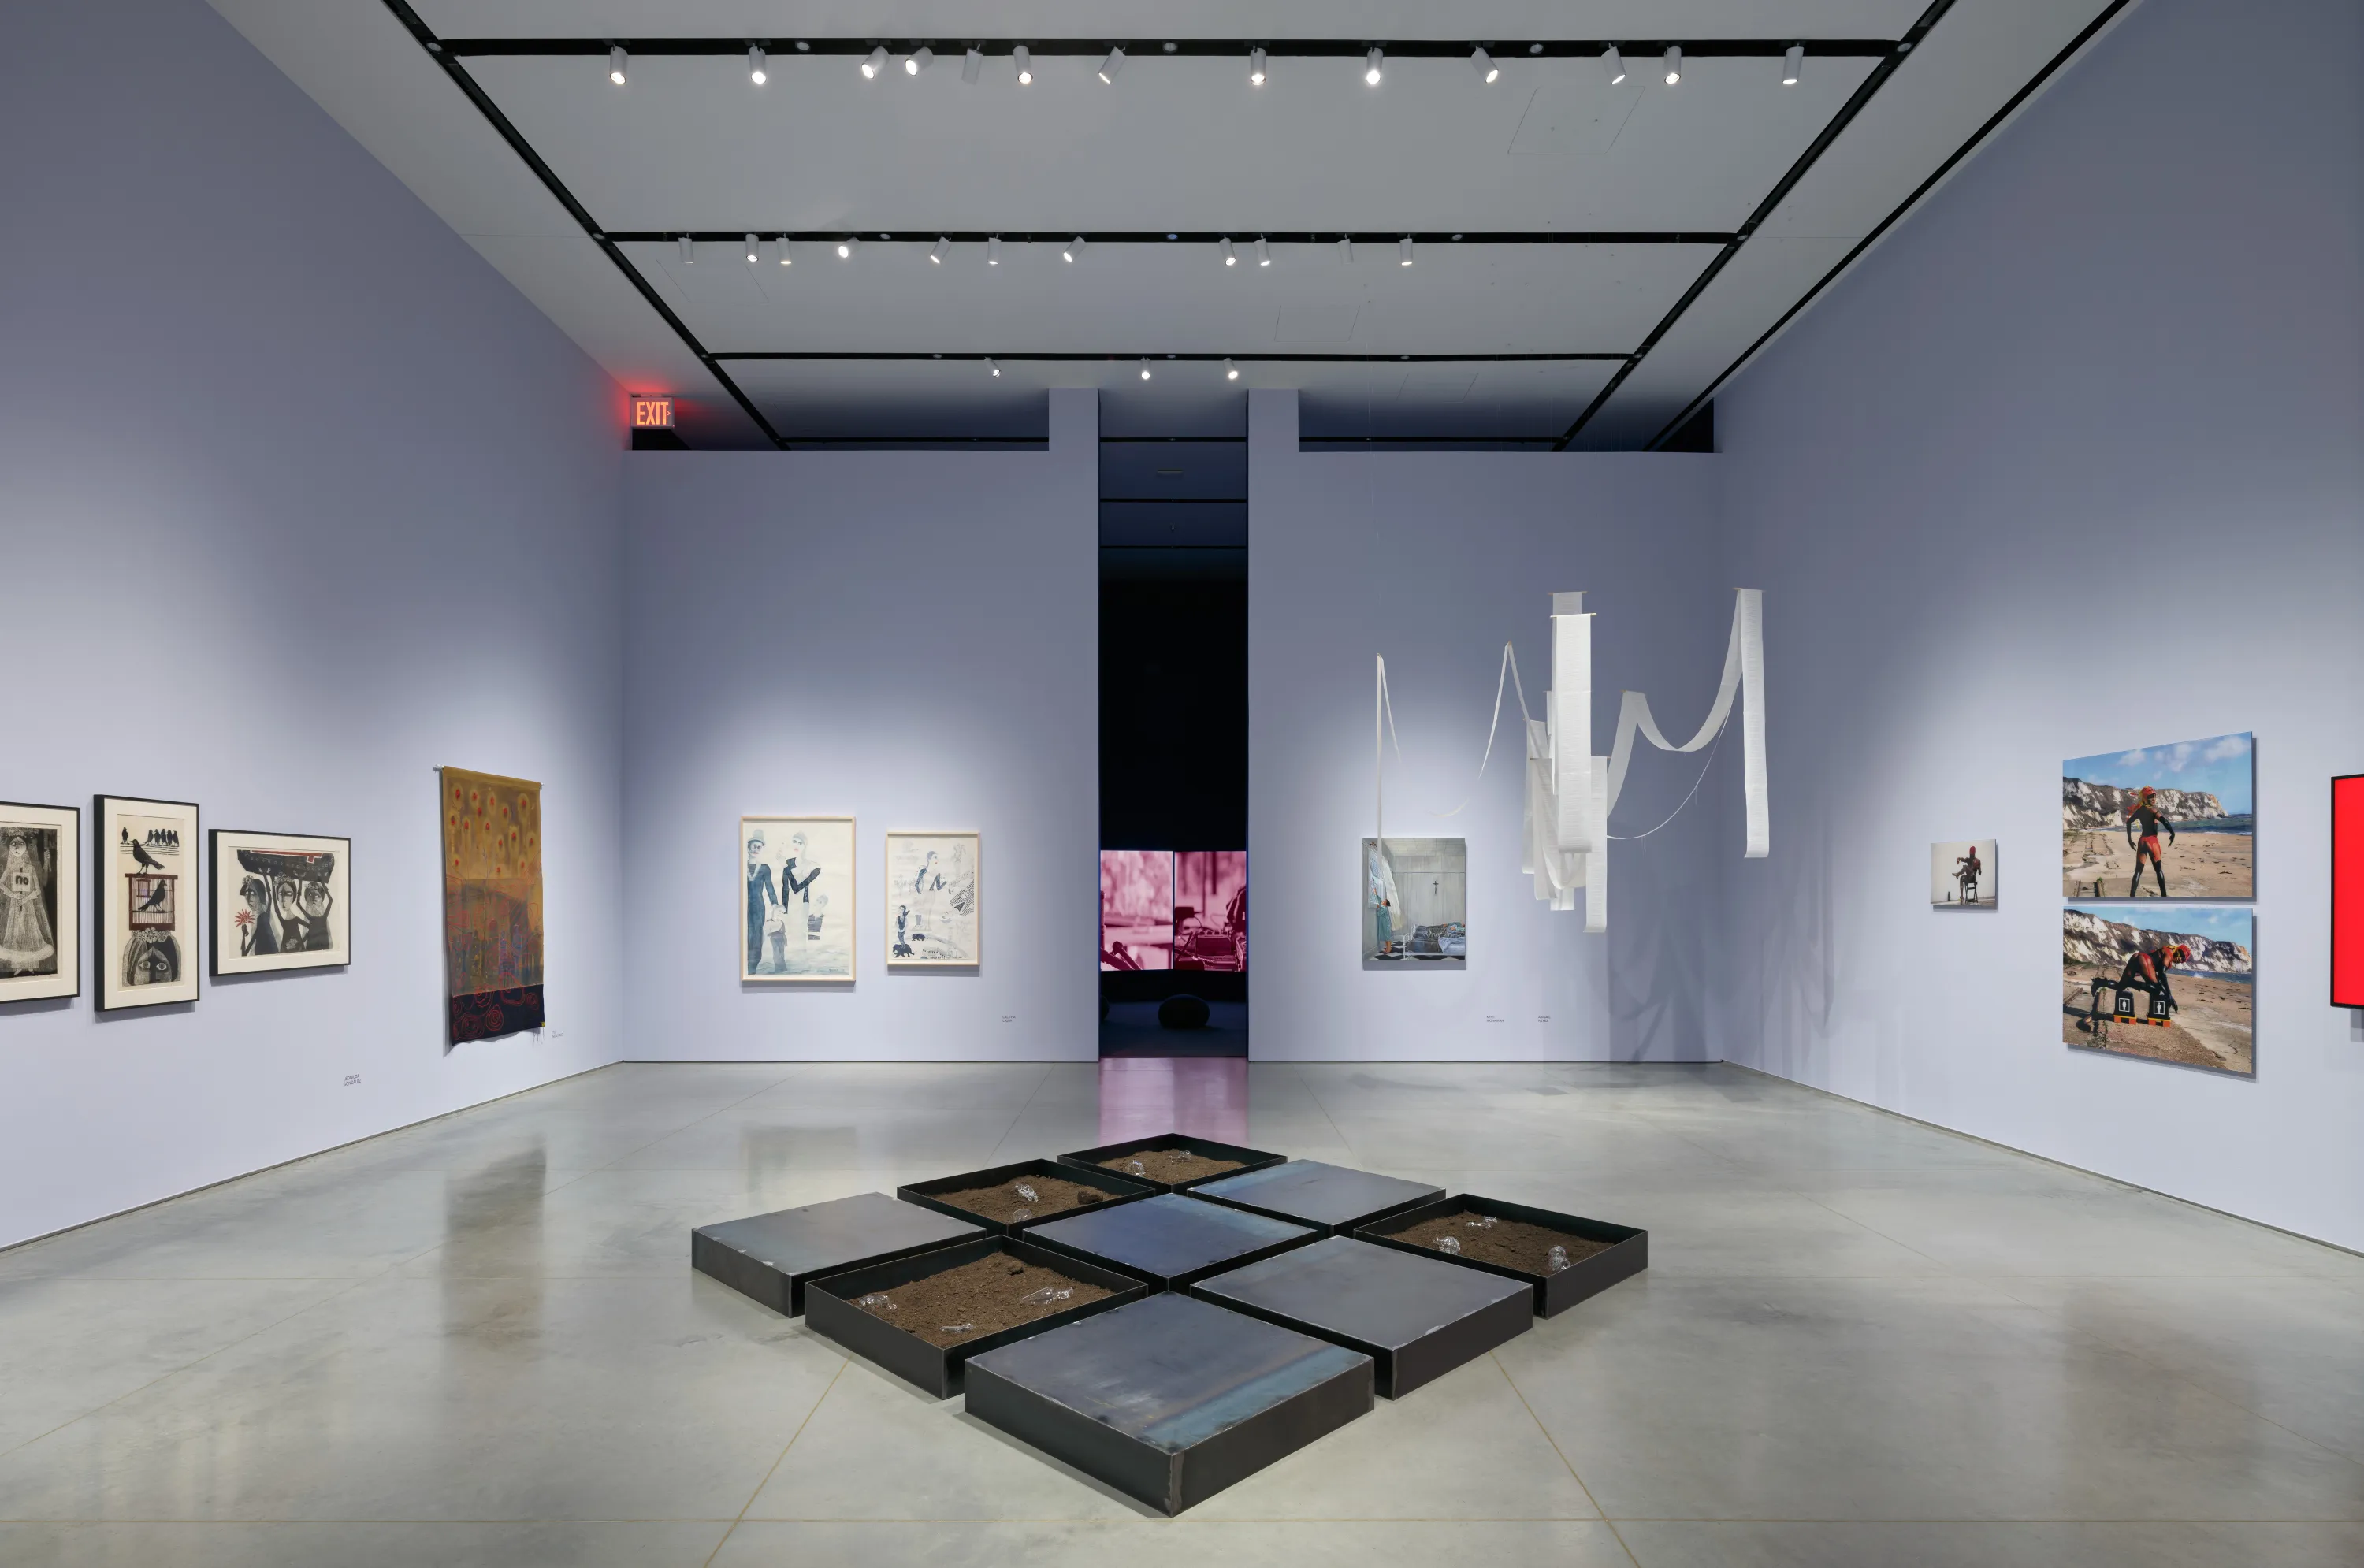 Gallery interior with a gray floor and light lavender walls with an aisle down the middle leading to a dark room with a video installation. There are several artworks displayed including paintings, photographs, canvas mounted on the wall and a hanging white paper ribbon installation and steel tray installation on the floor.